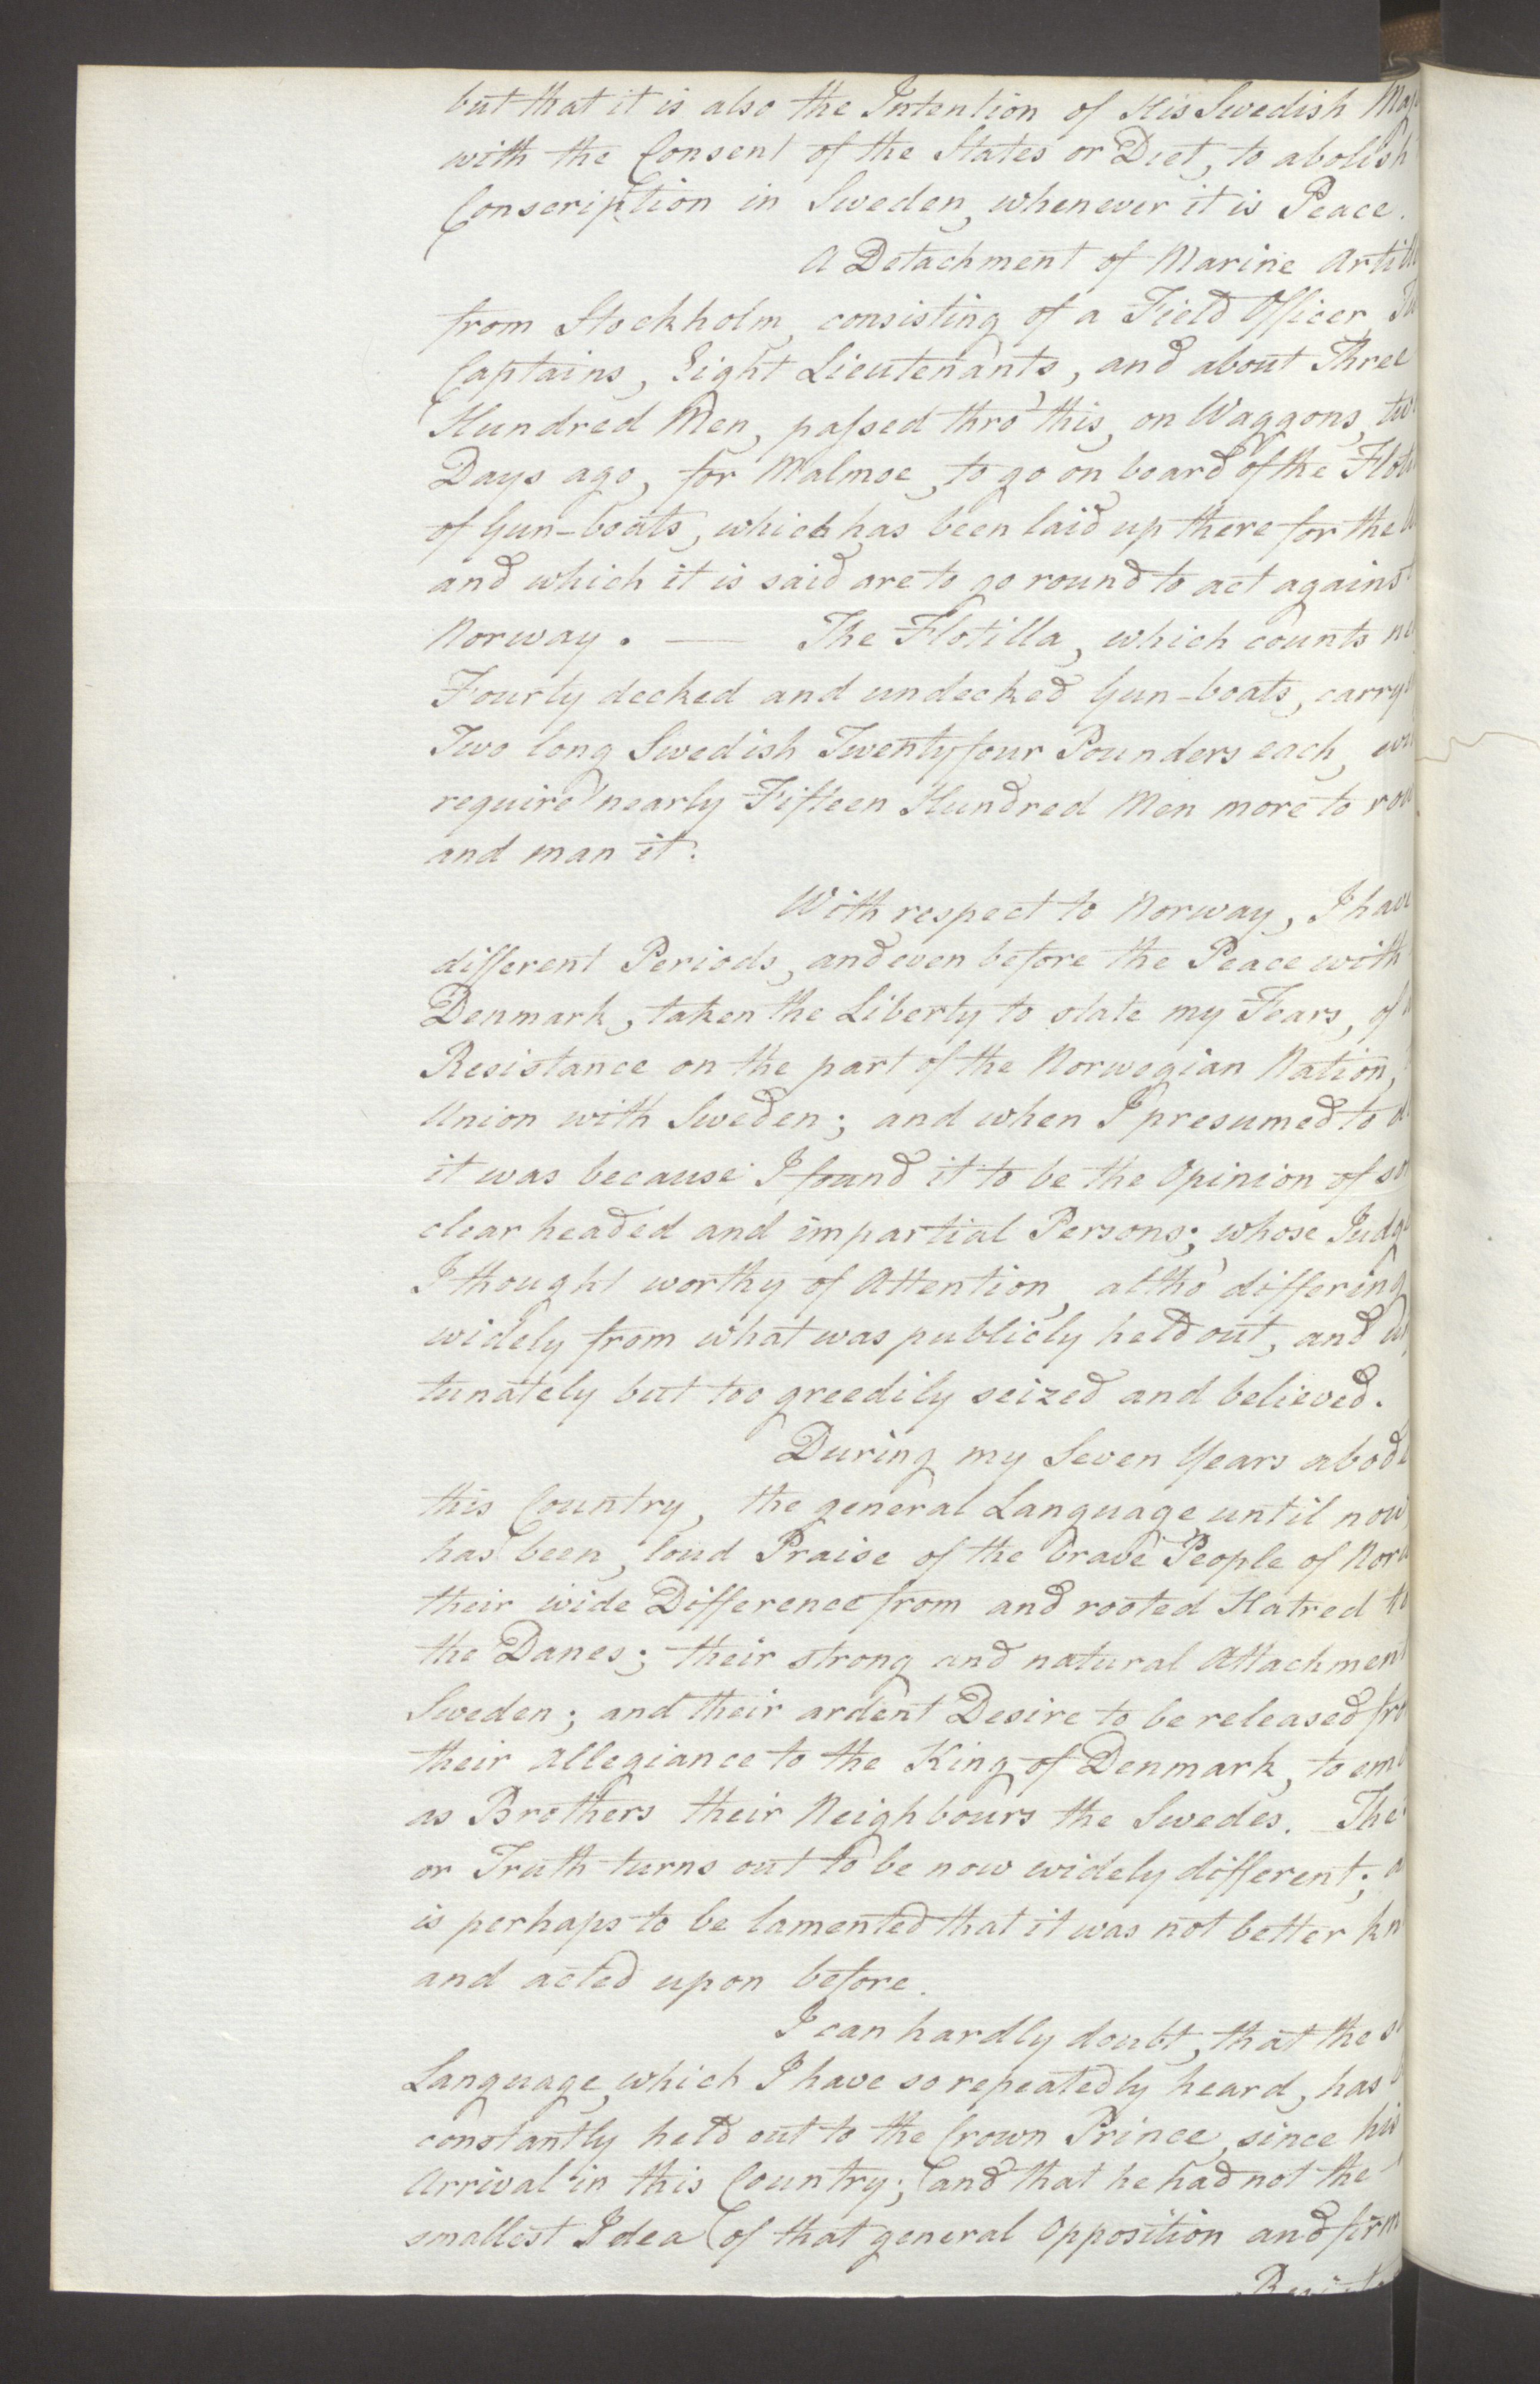 Foreign Office*, UKA/-/FO 38/16: Sir C. Gordon. Reports from Malmö, Jonkoping, and Helsingborg, 1814, s. 39